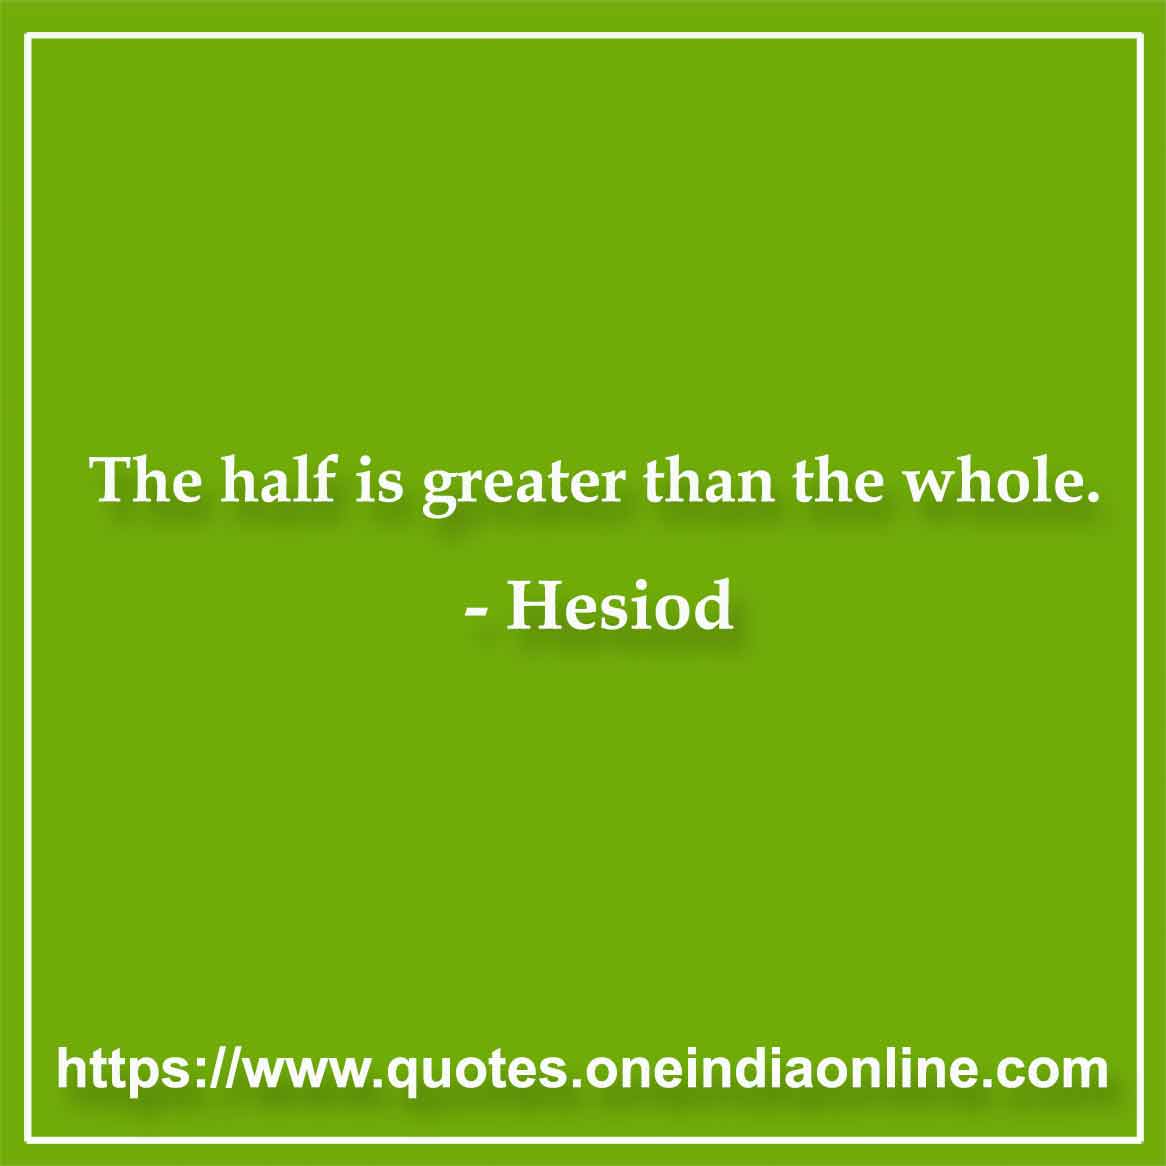 The half is greater than the whole.

- Hesiod 